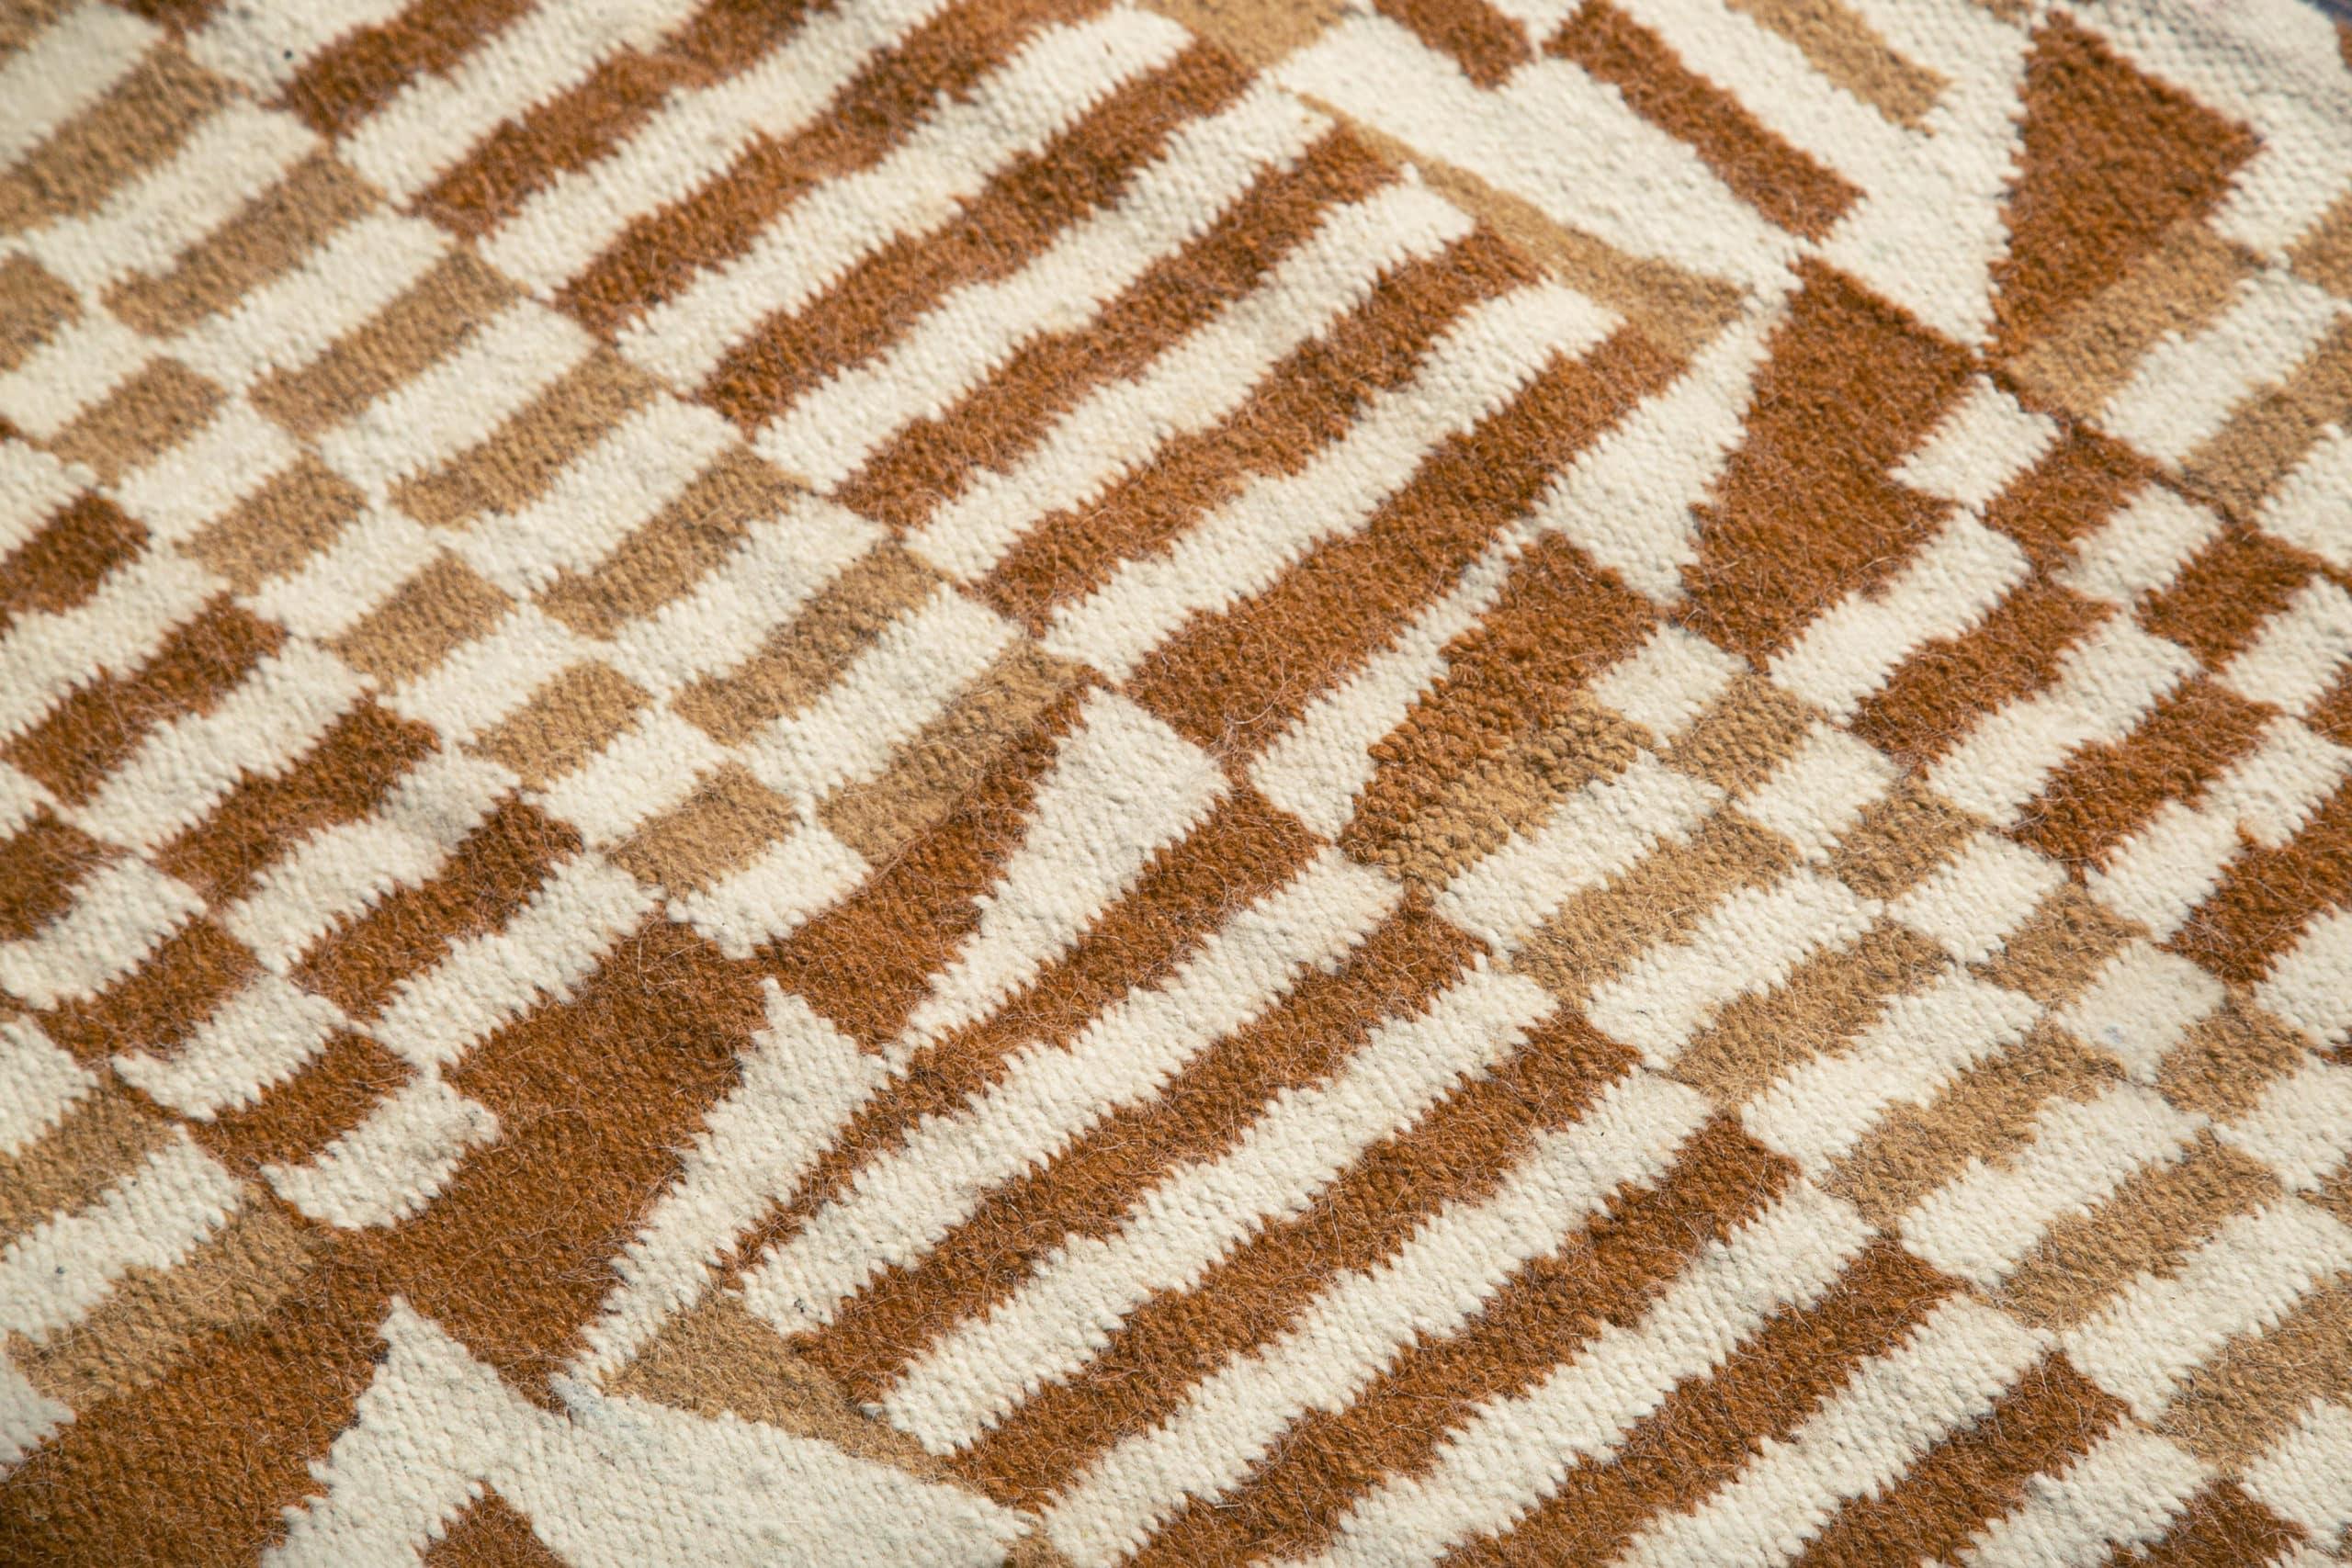 Hand-Woven Nazmiyal Collection Andean Checkers Design Kilim Rug By Genaro Rivas. 8 ft x 8ft For Sale